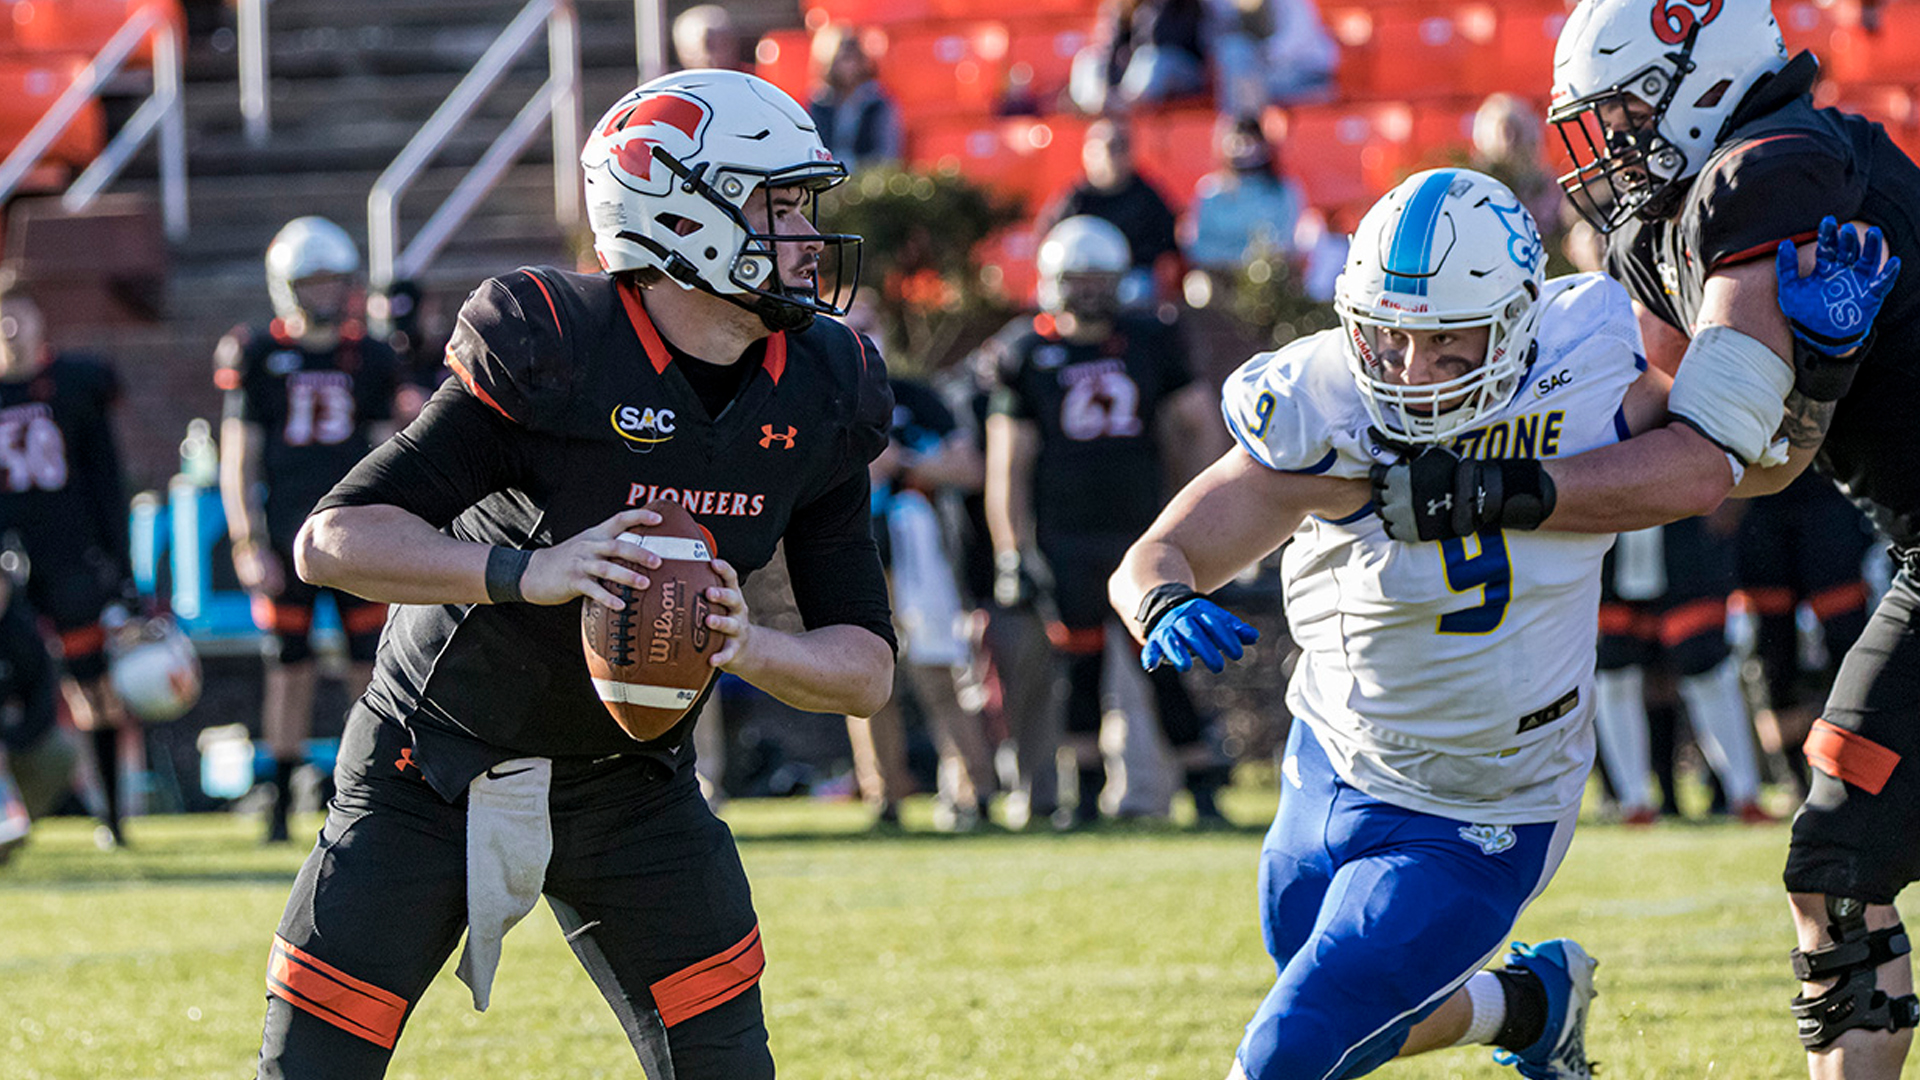 Rogan Wells accounted for 6 touchdowns (5 pass, 1 rush) and threw for a career-best 519 yards in Tusculum's 49-17 win over Limestone (photo by Chuck Williams)